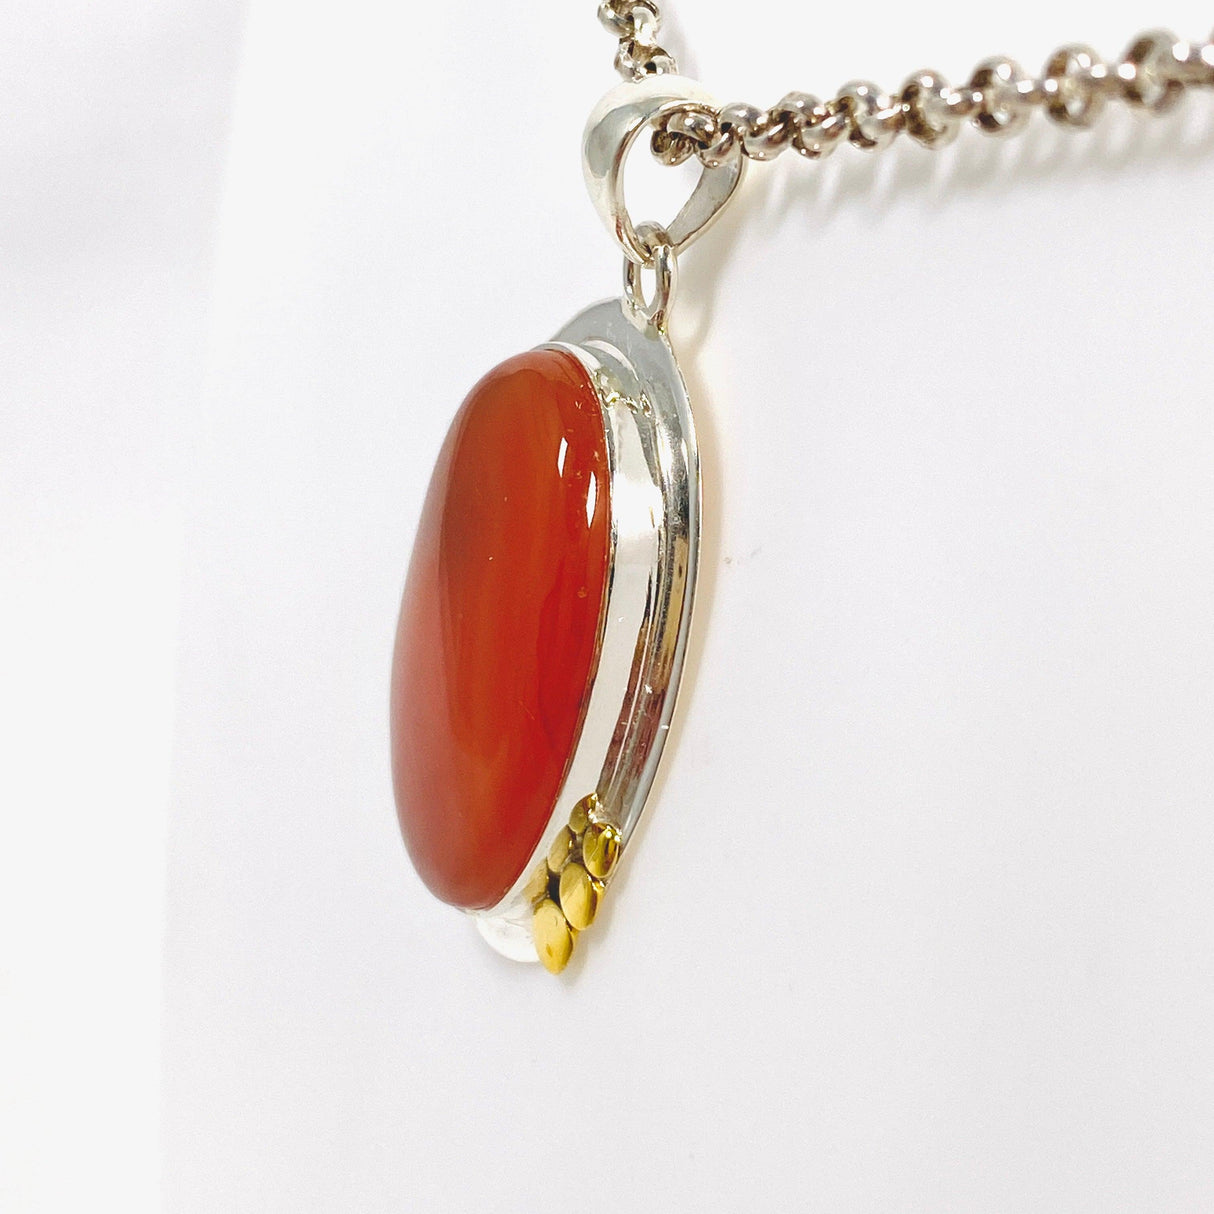 Carnelian oval pendant with gold detailing KPGJ3678 - Nature's Magick